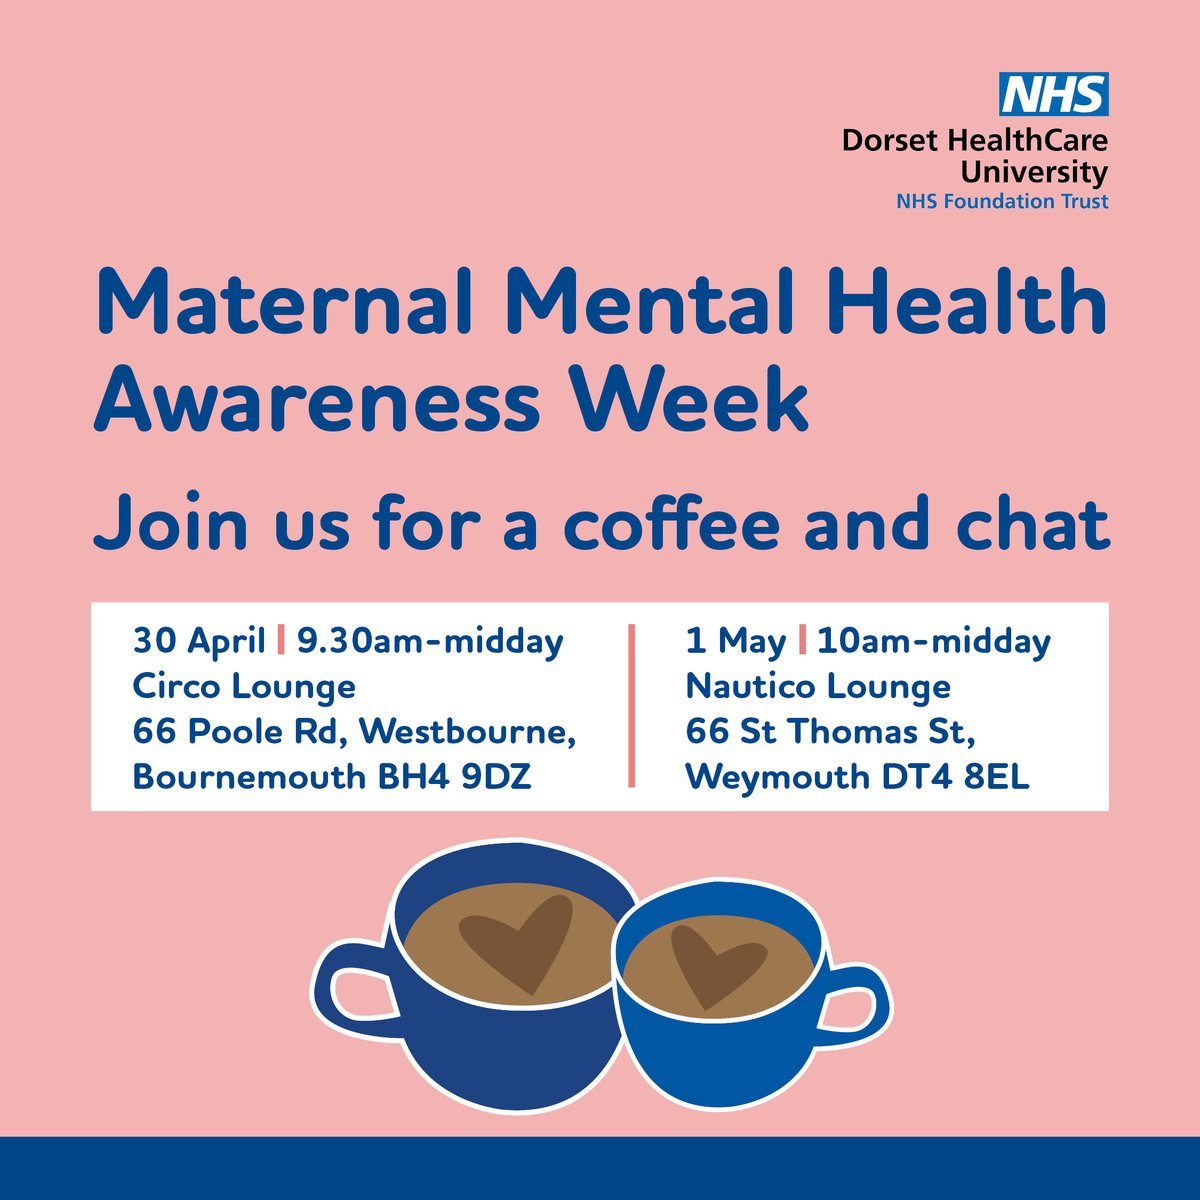 Two coffee mornings are being hosted for #MaternalMentalHealthAwarenessWeek (29 April-5 May). 30 April, 9.30am-12pm at Circo Lounge (66 Poole Road, Westbourne) and 1 May, 10am-12pm at Nautico Lounge (66 St Thomas Street, Weymouth). @Steps2Wellbeing @UHD_NHS @DCHFT @MMHAlliance